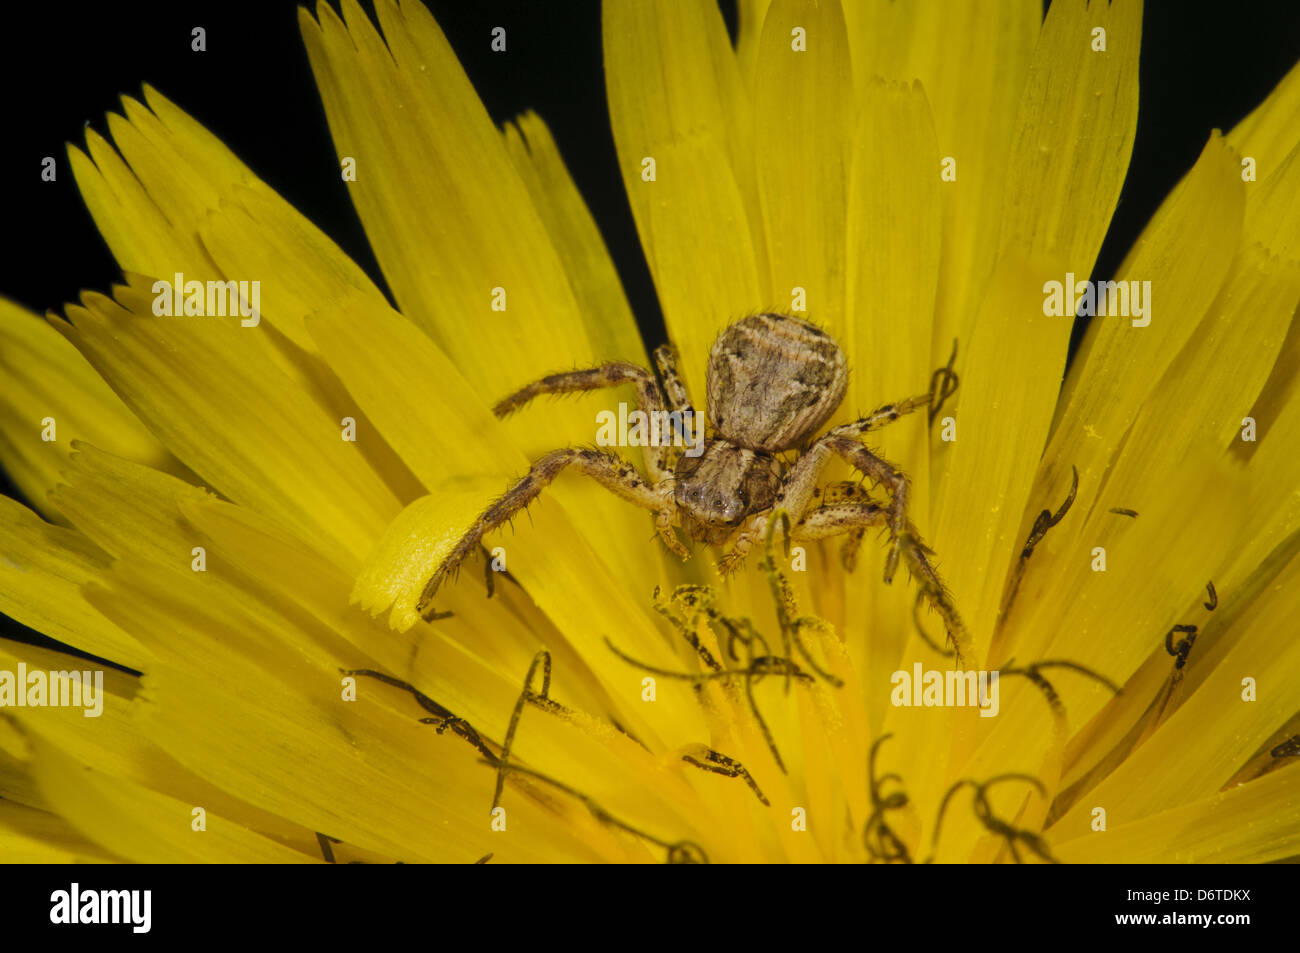 Crab Spider (Xysticus cristatus) adult, resting on dandelion flower, Crossness Nature Reserve, Bexley, Kent, England, September Stock Photo